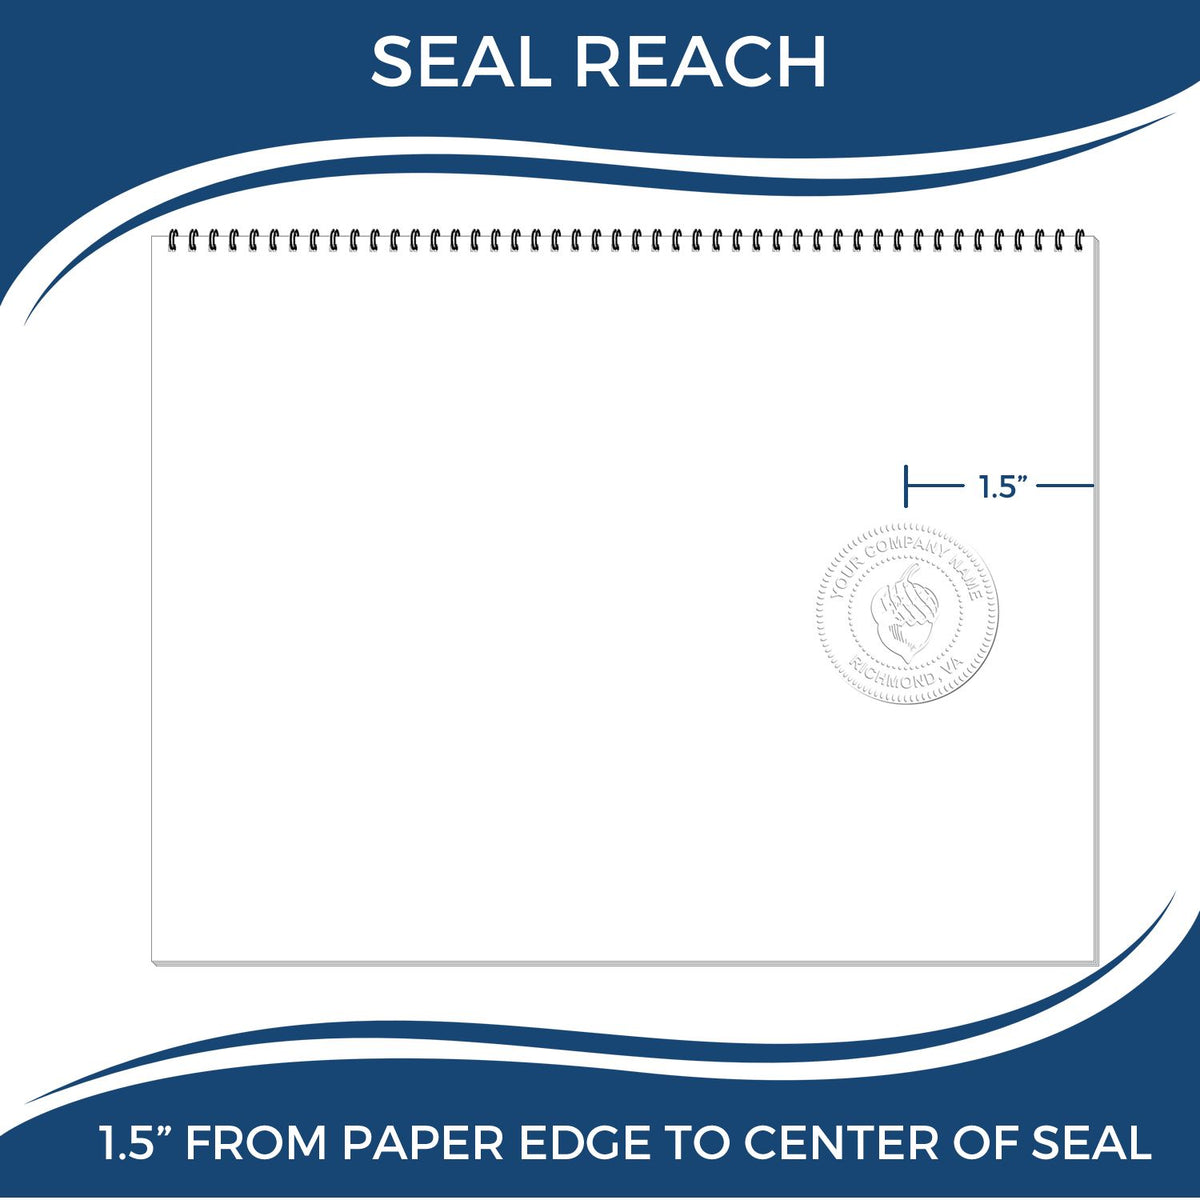 An infographic showing the seal reach which is represented by a ruler and a miniature seal image of the Gift Arkansas Land Surveyor Seal